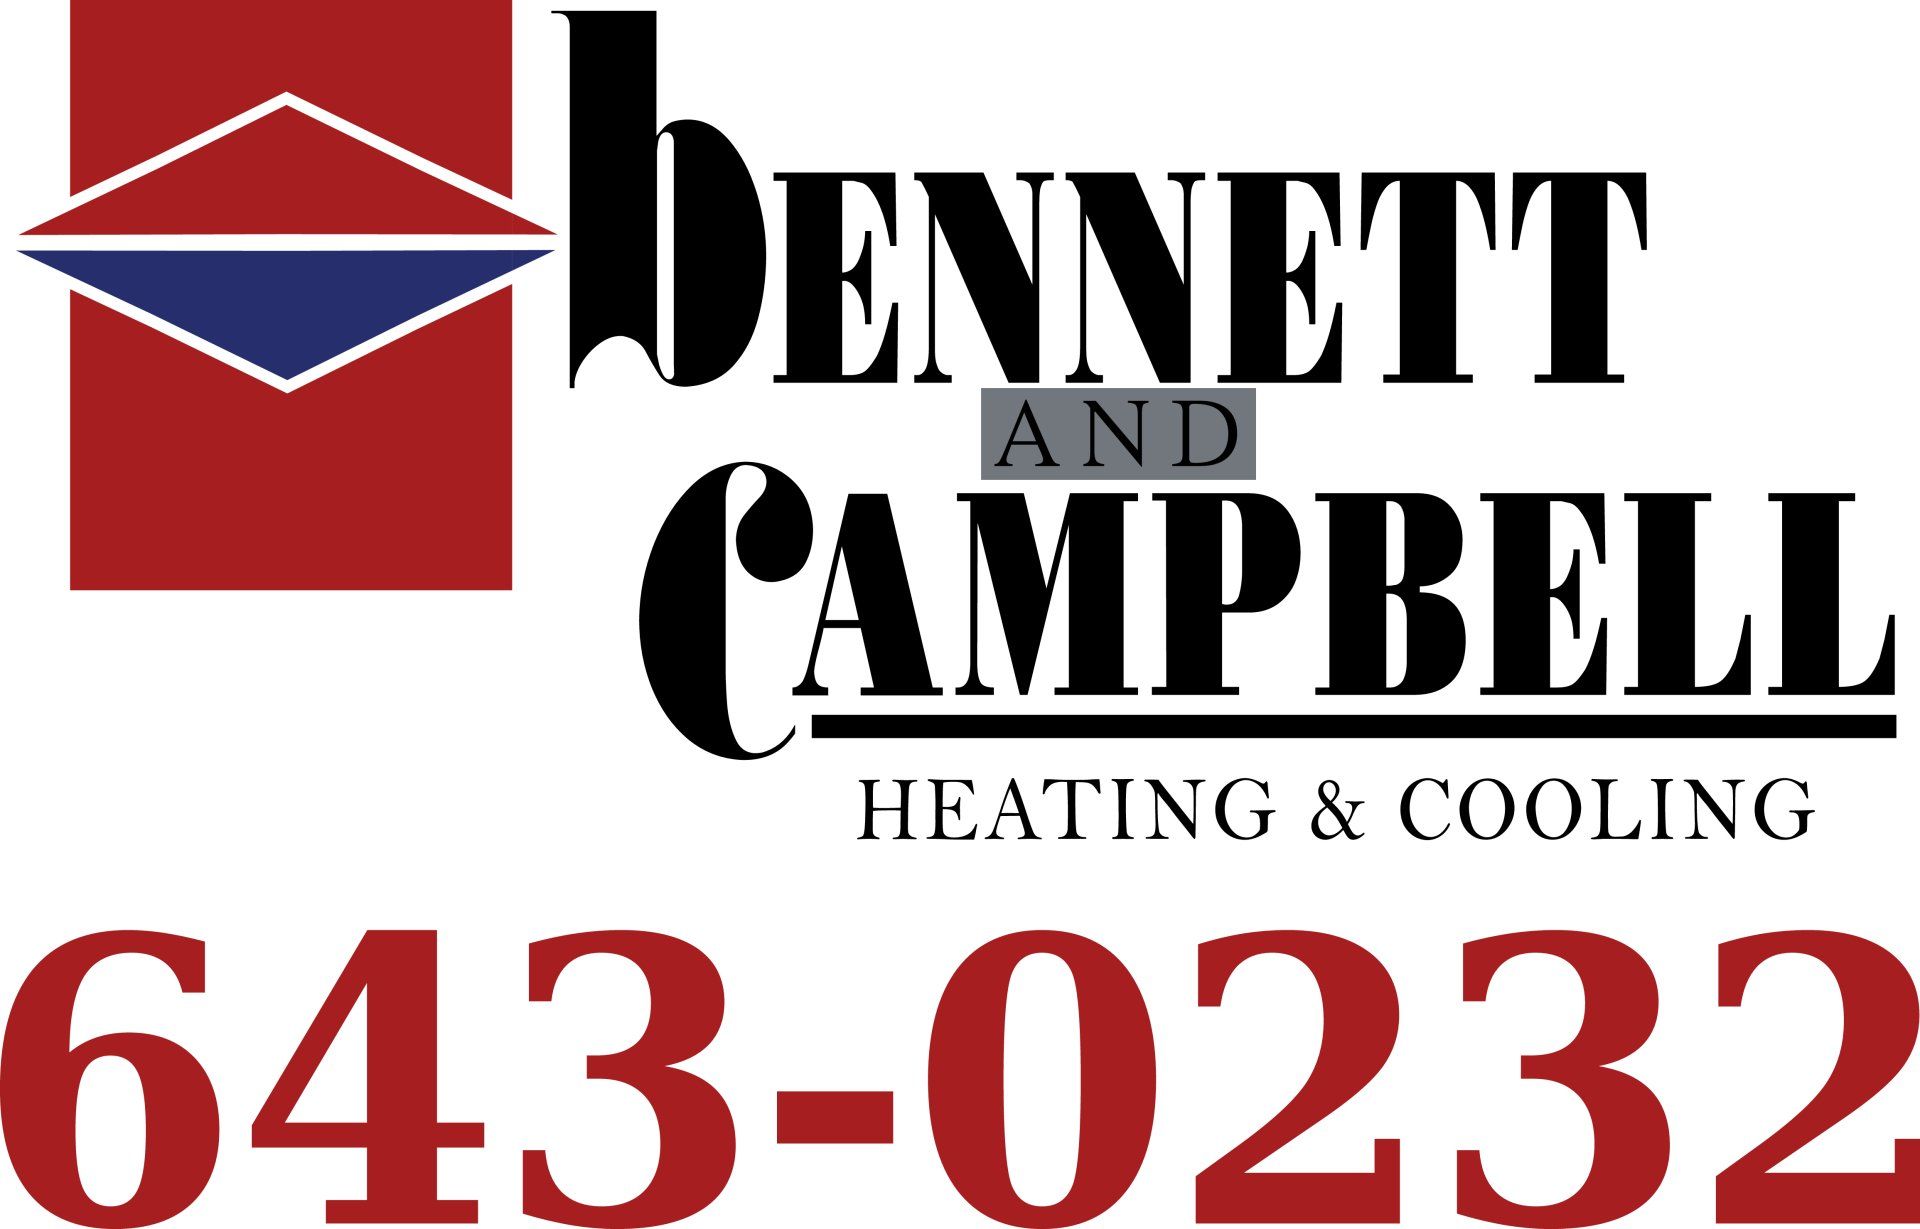 Bennett & Campbell Heating and Cooling Inc.